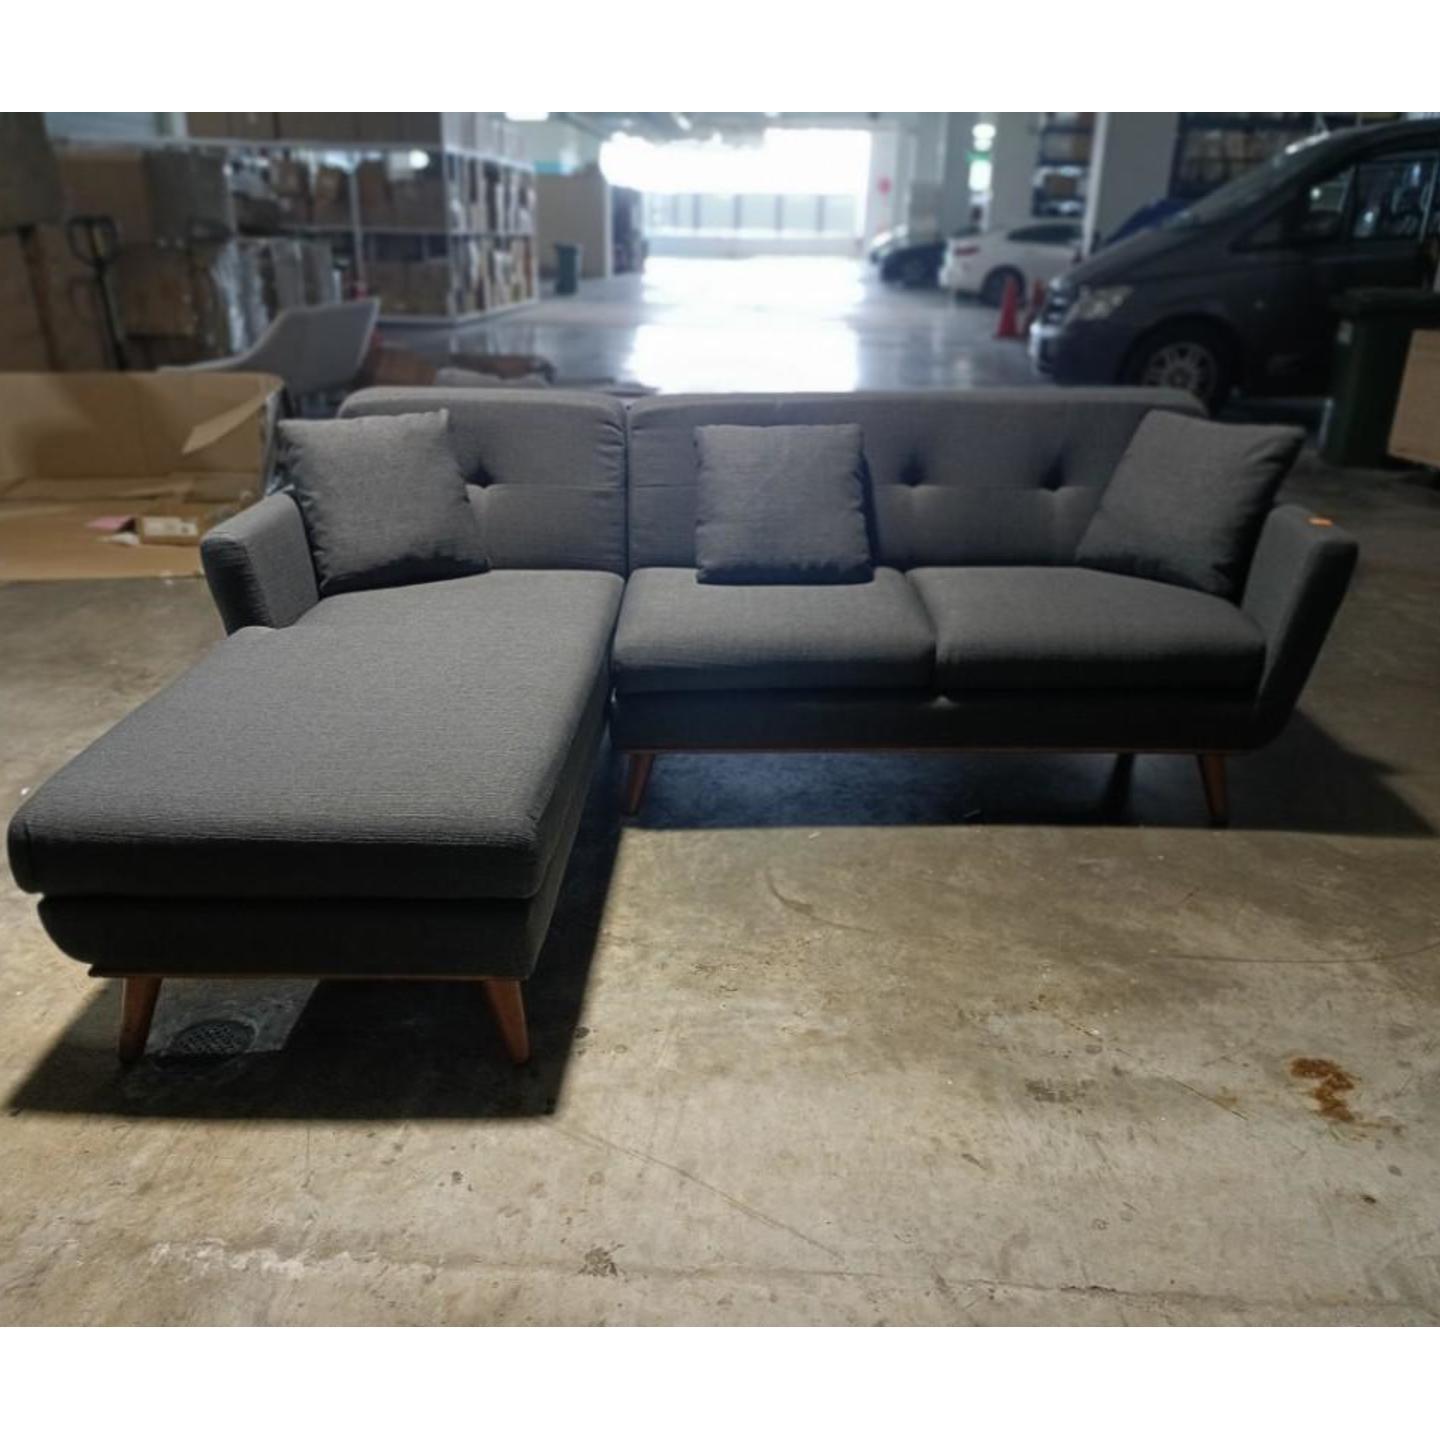 HARRIS L-Shaped Sofa in STONE GREY FABRIC (RIGHT WHEN SEATED)